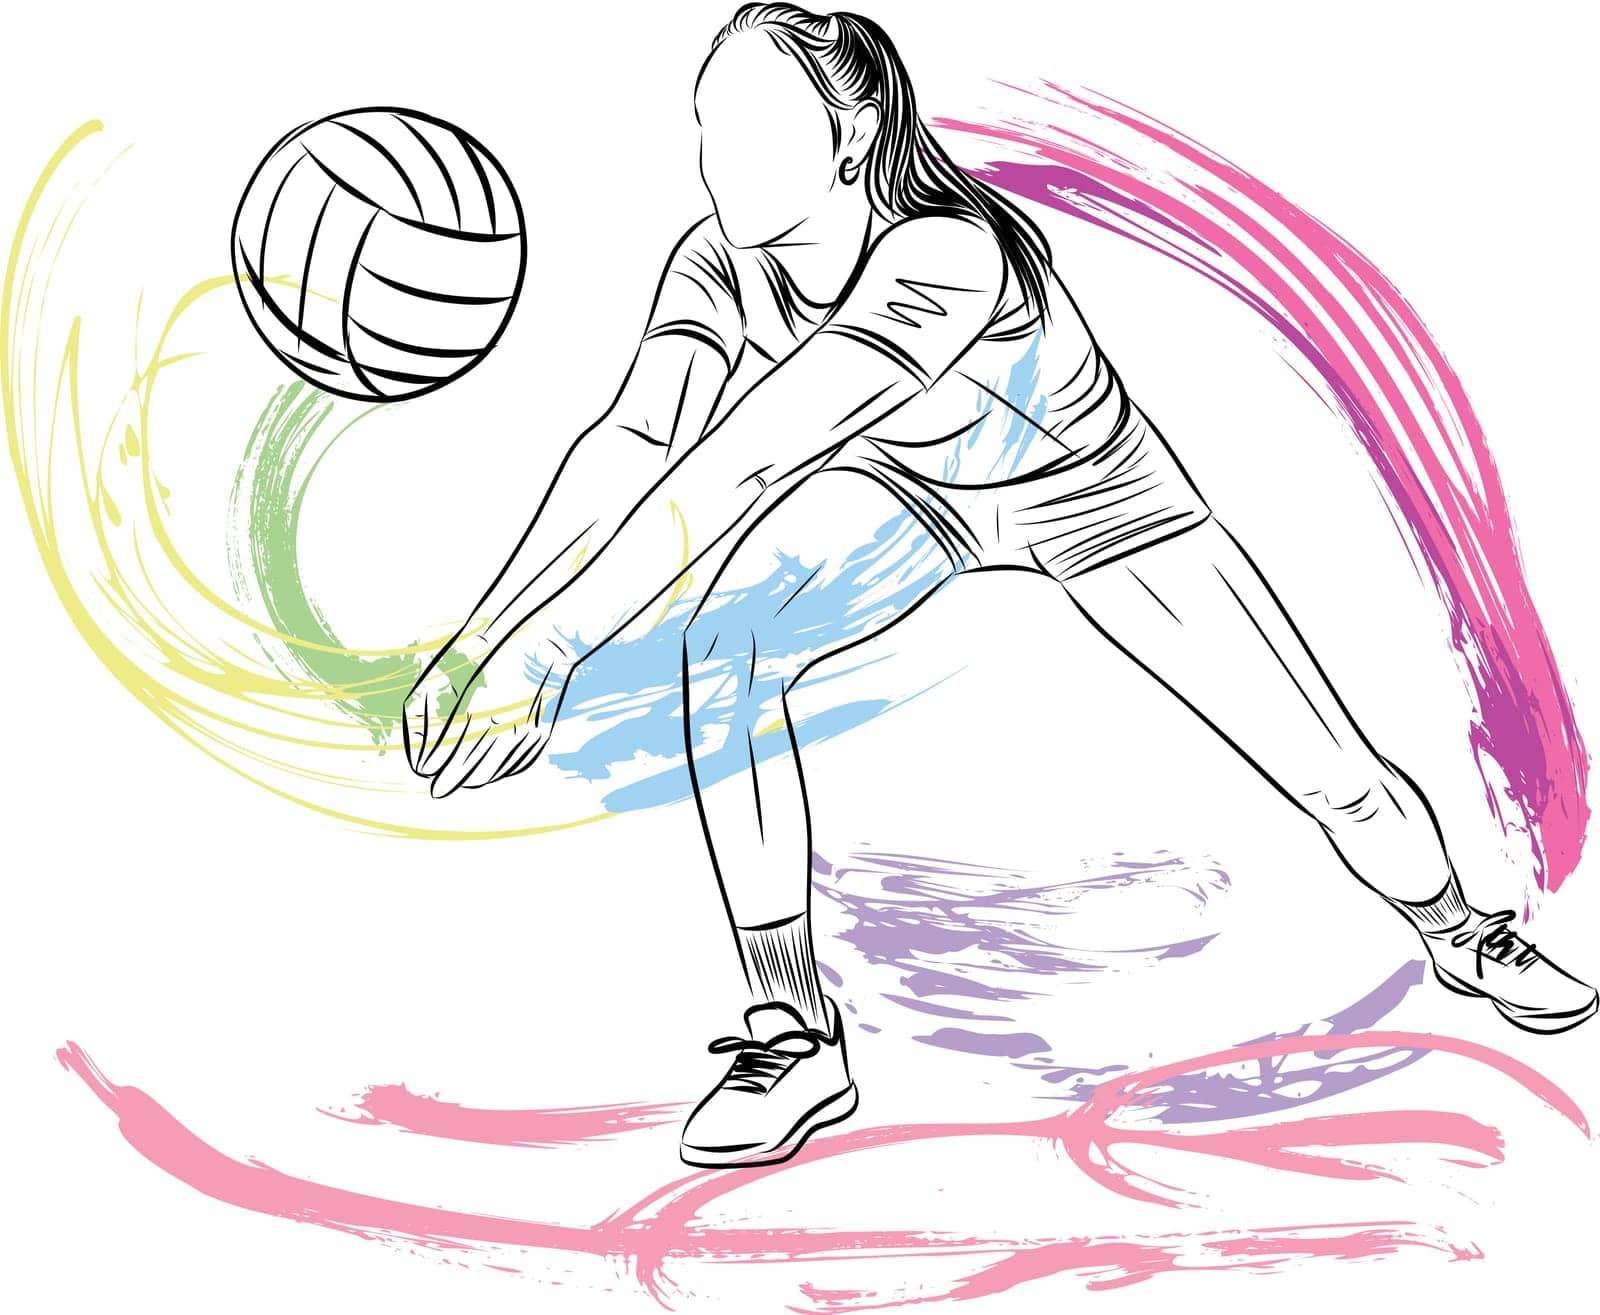 Sketch illustration of Female volleyball player in action